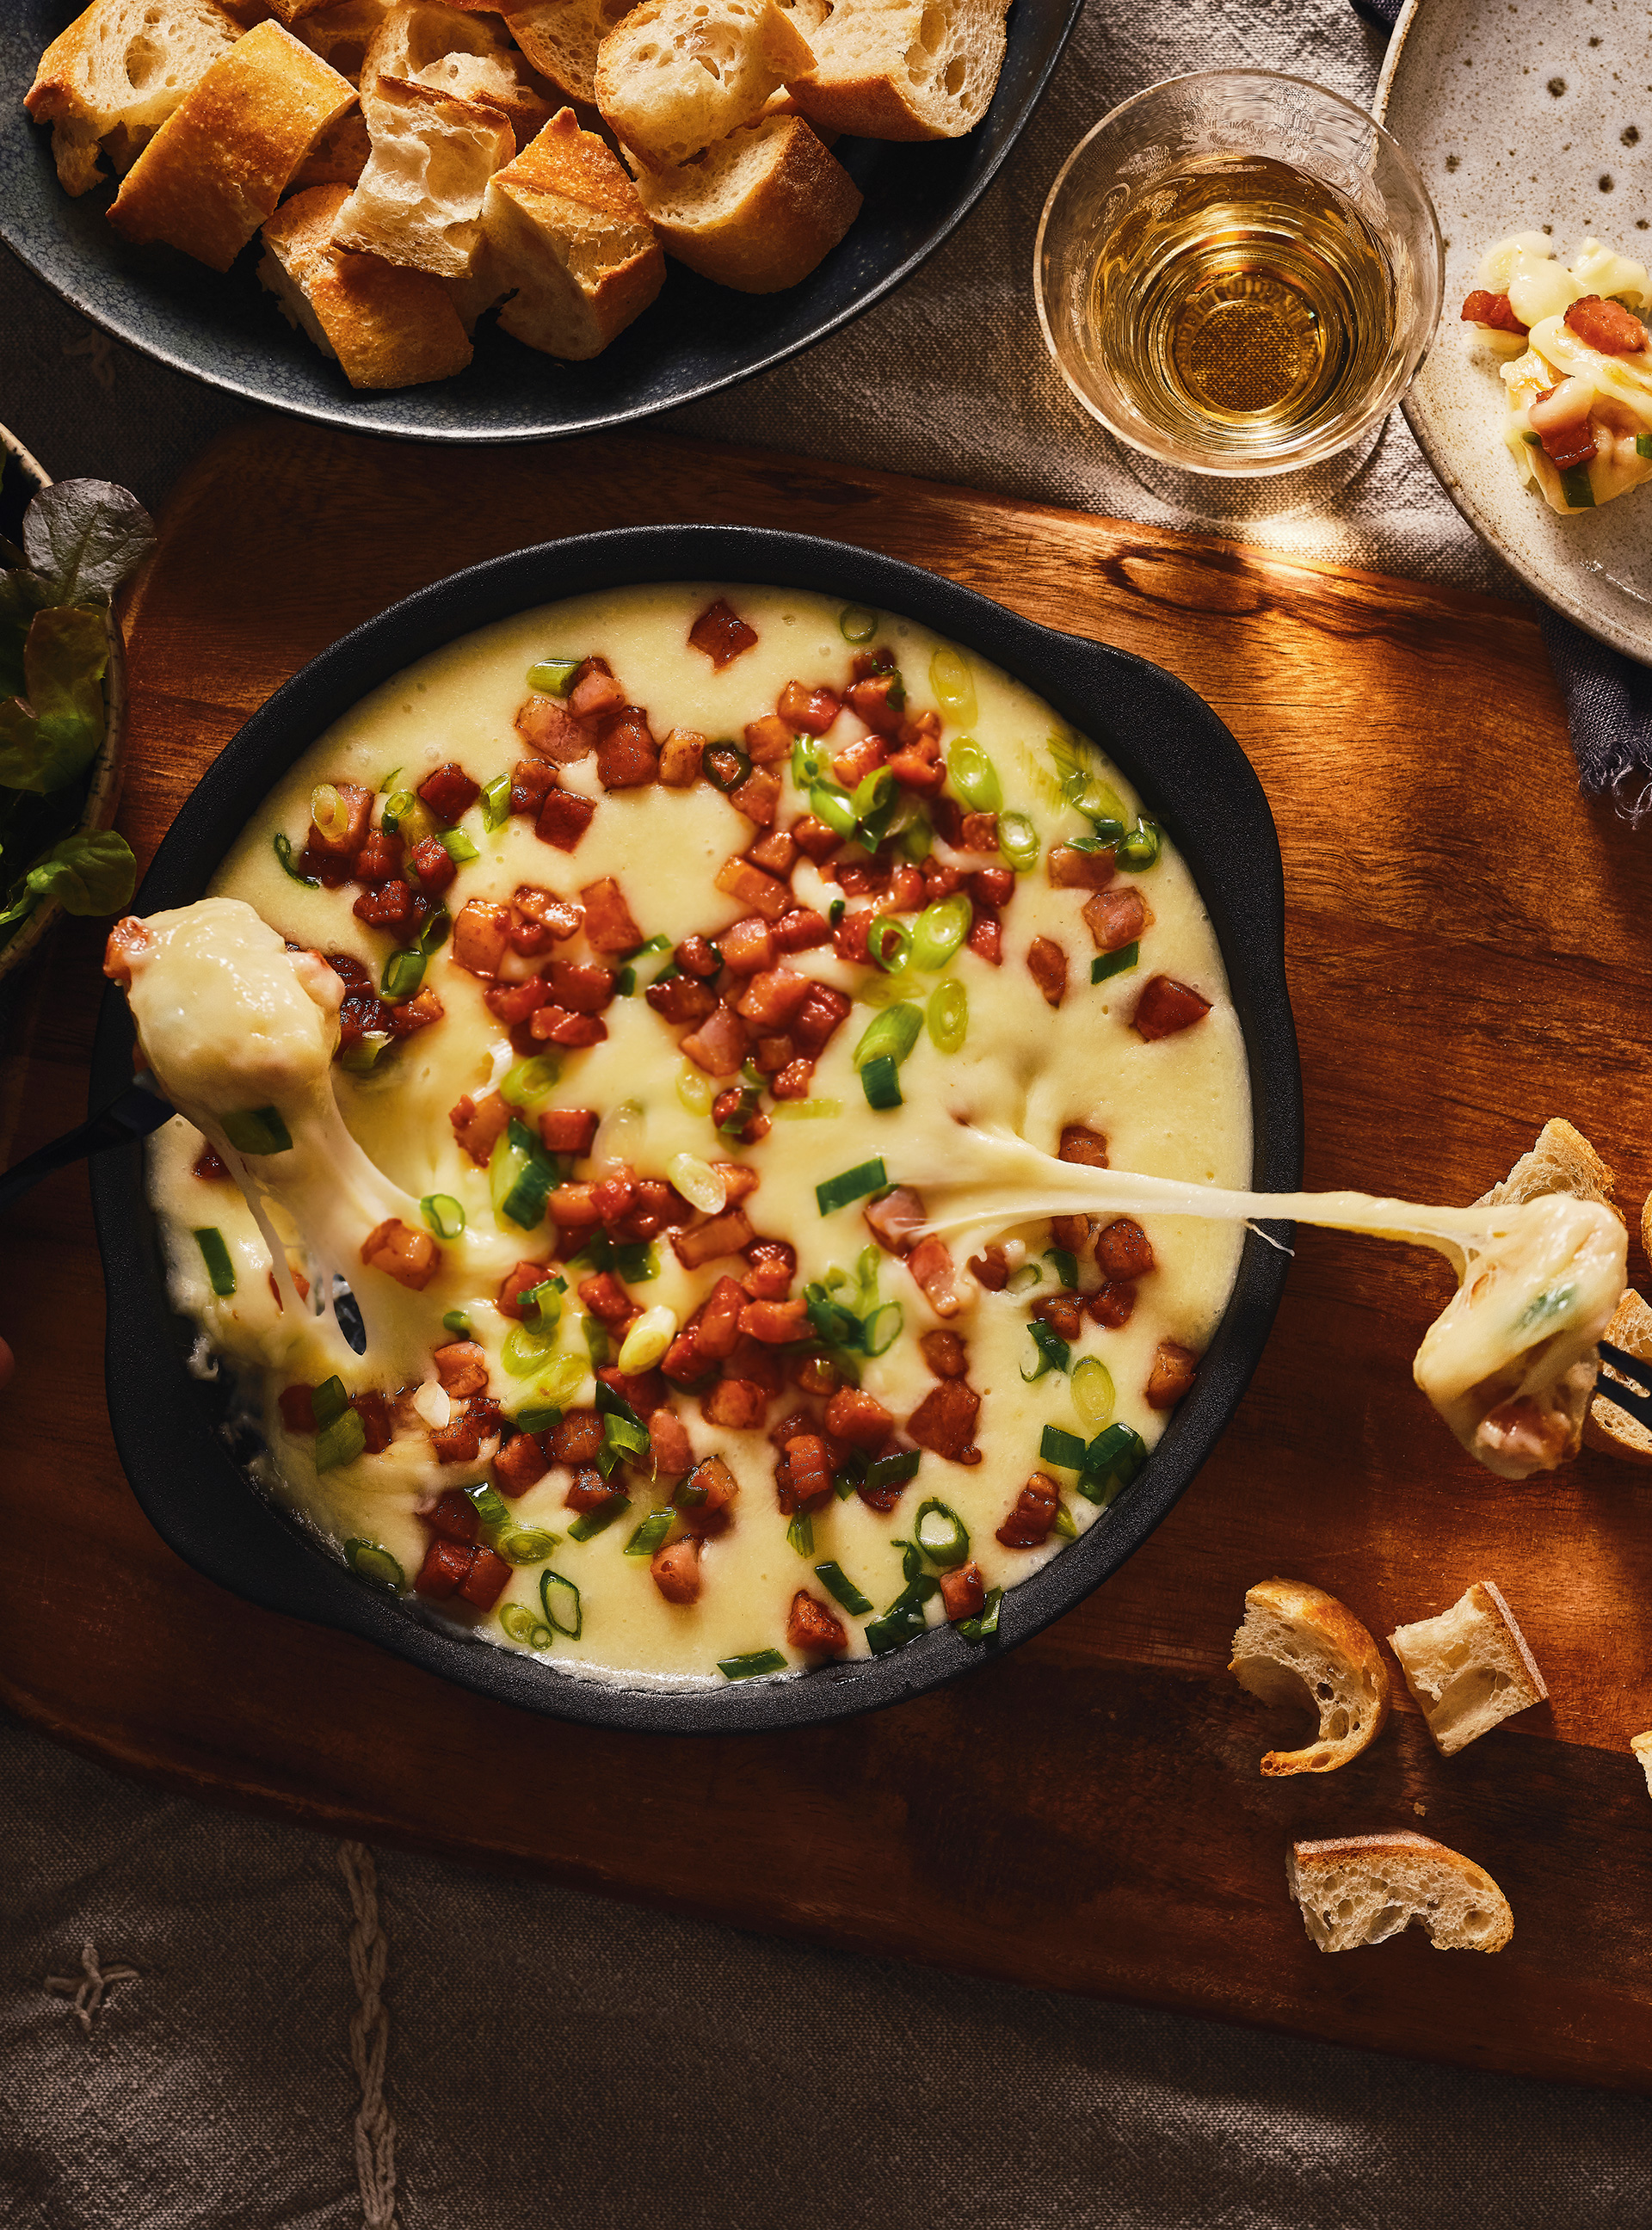 Oven-Baked Cheese Fondue with Bacon and Vermouth